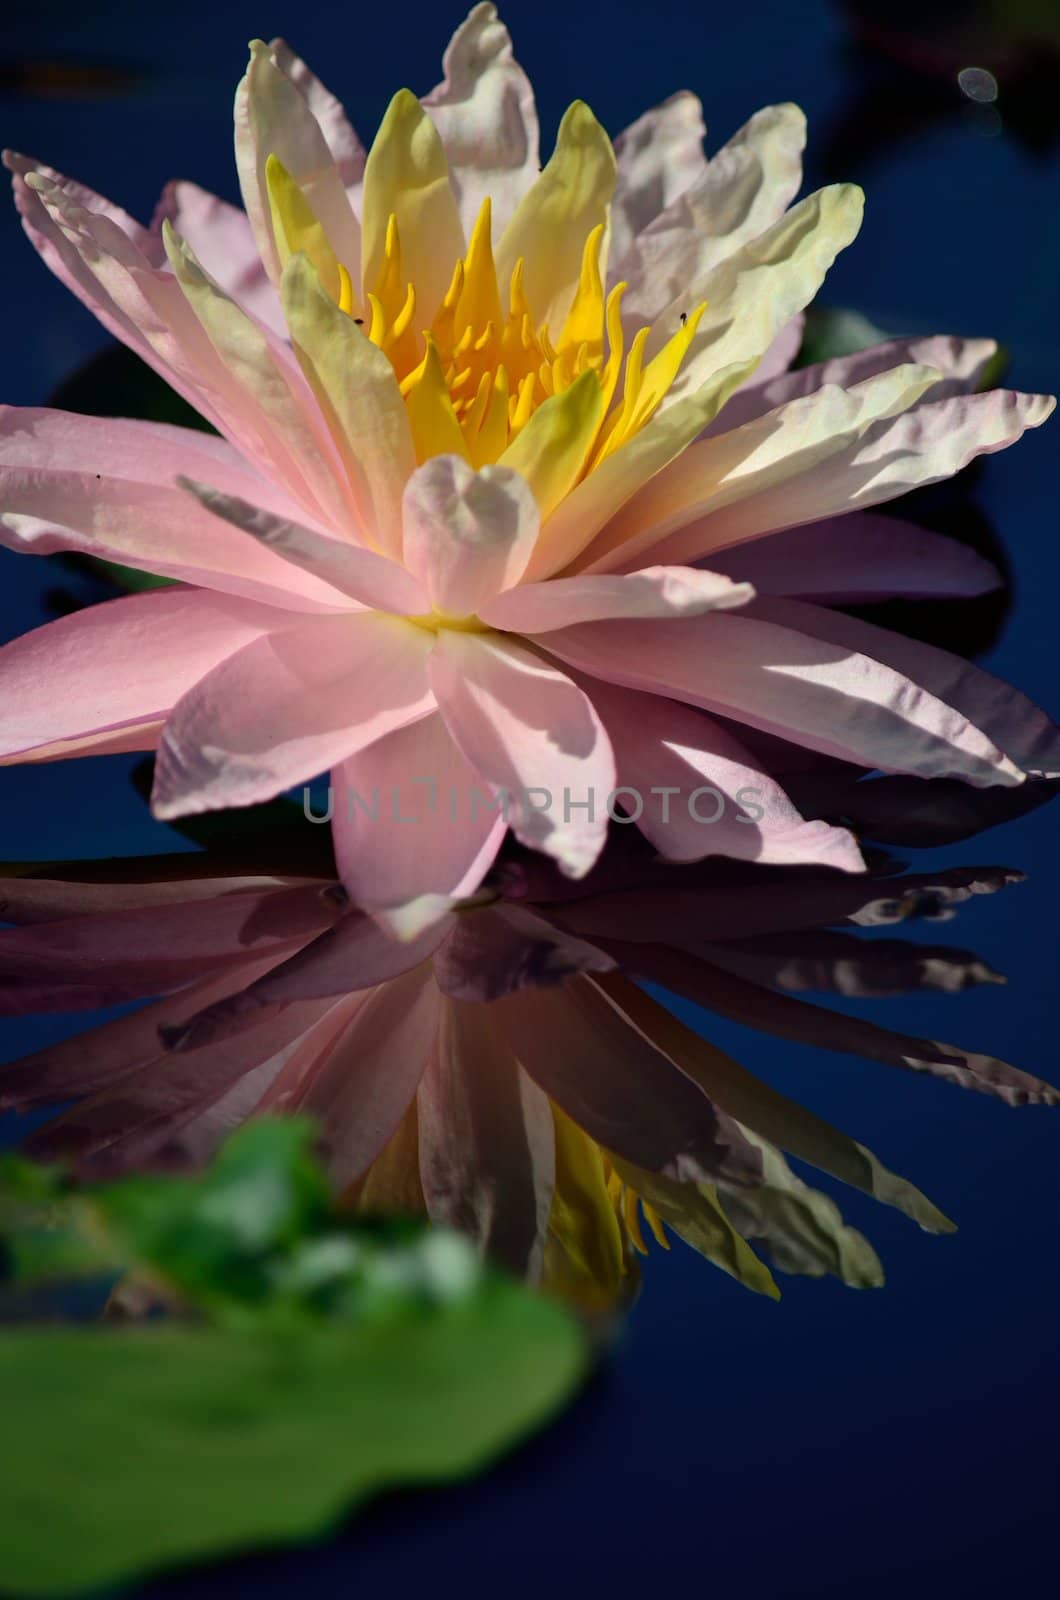 Pinnk and yellow water lily by jackie@debuskphoto.com